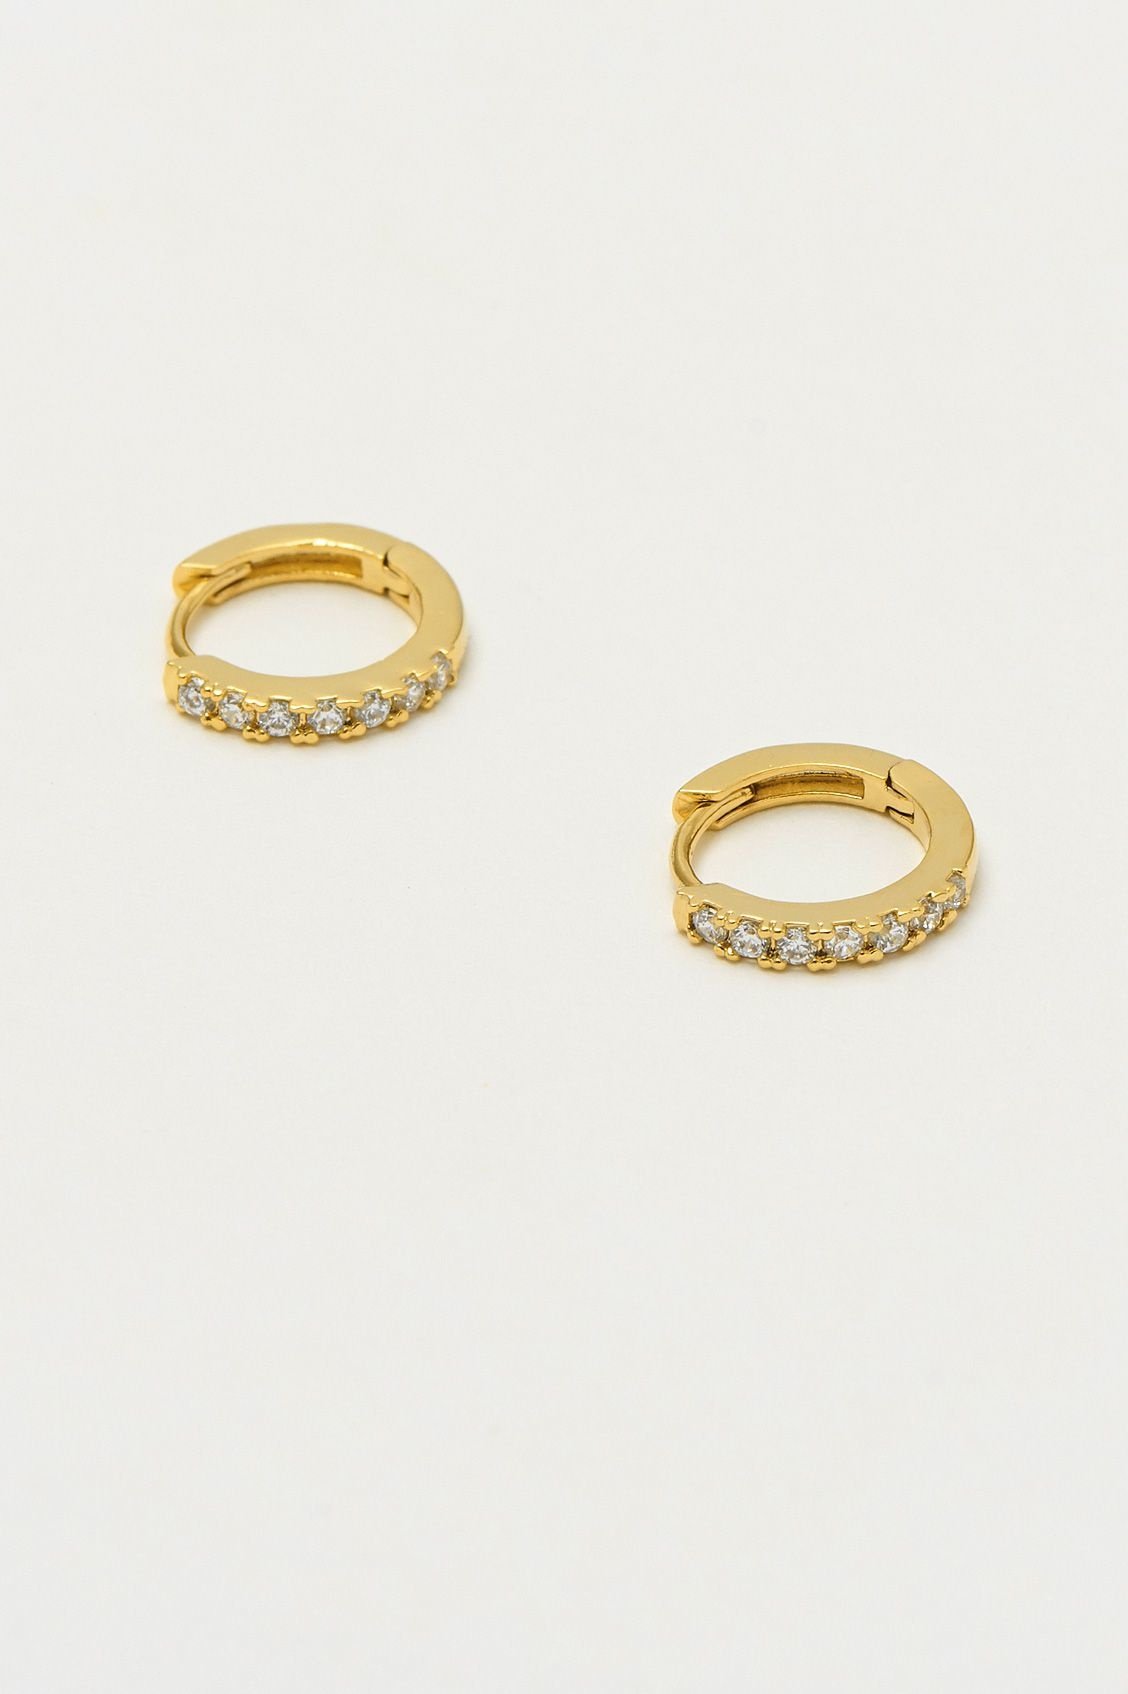 estella bartlett [EB1957] Pave Set Hoop Earrings Gold Plated, With White CZ